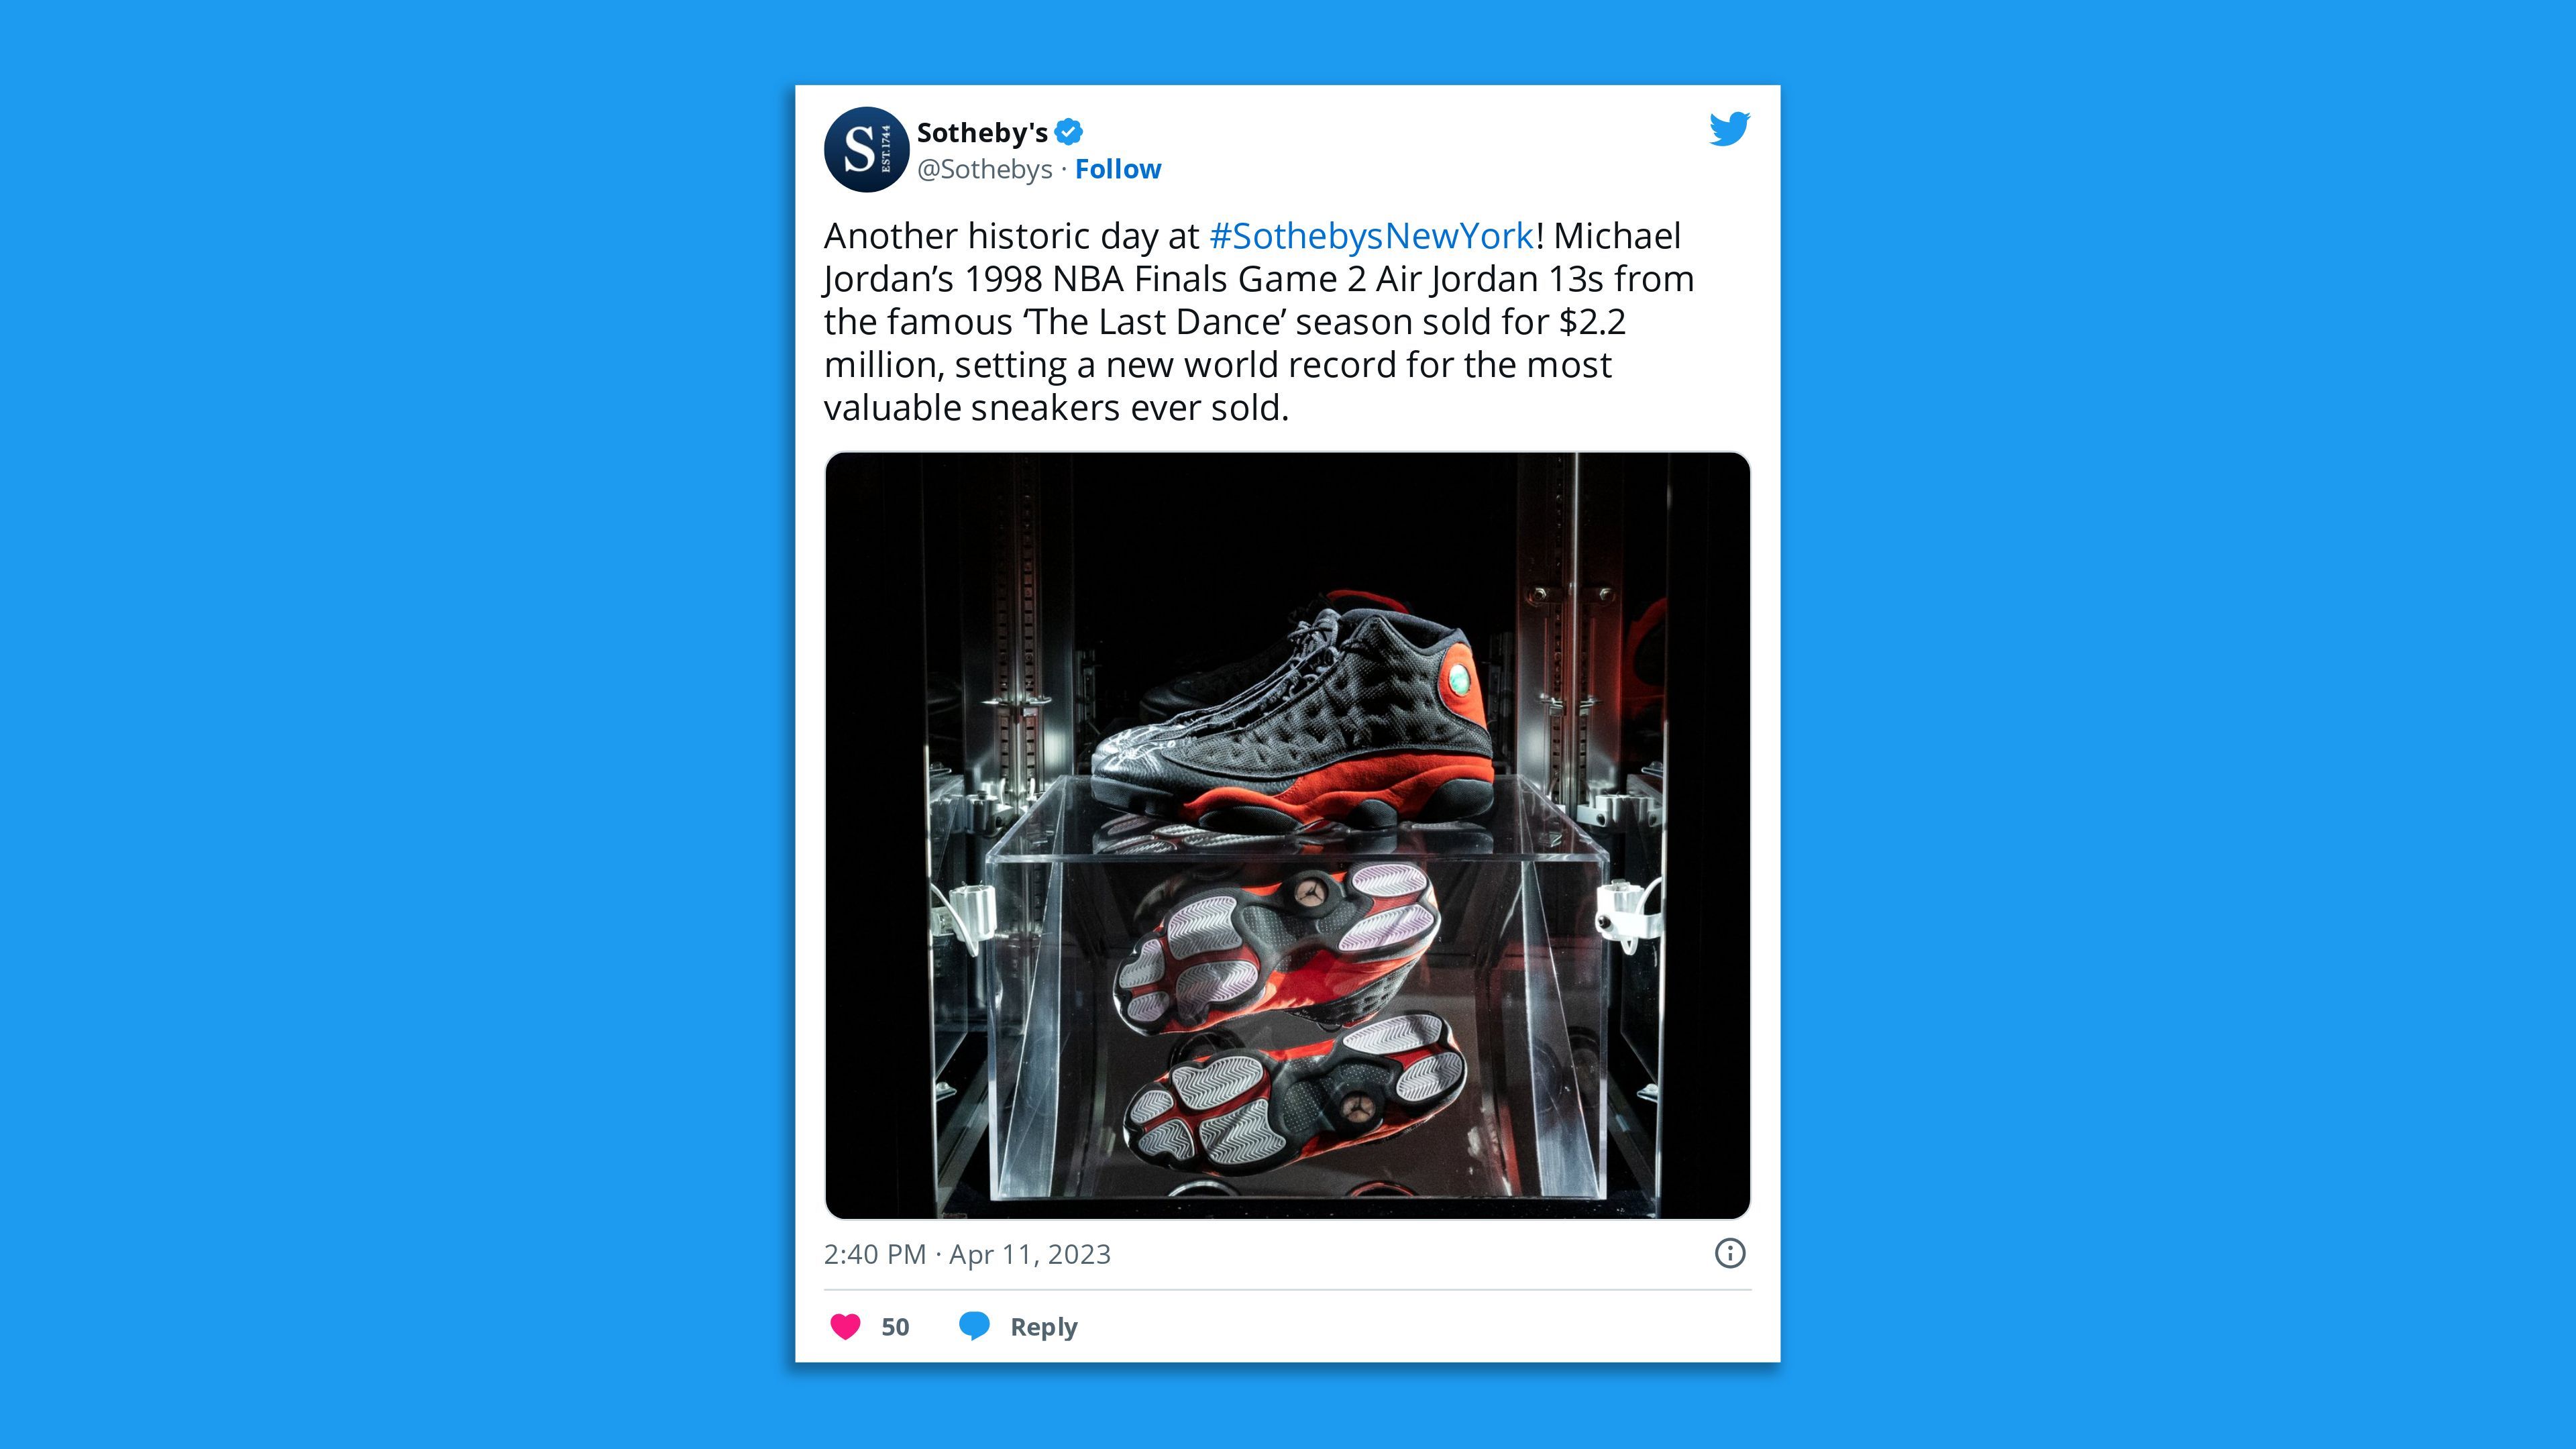 A screenshot of a Southeby's tweet saying: "Tweet See new Tweets Conversation Sotheby's @Sothebys Another historic day at #SothebysNewYork! Michael Jordan’s 1998 NBA Finals Game 2 Air Jordan 13s from the famous ‘The Last Dance’ season sold for $2.2 million, setting a new world record for the most valuable sneakers ever sold."